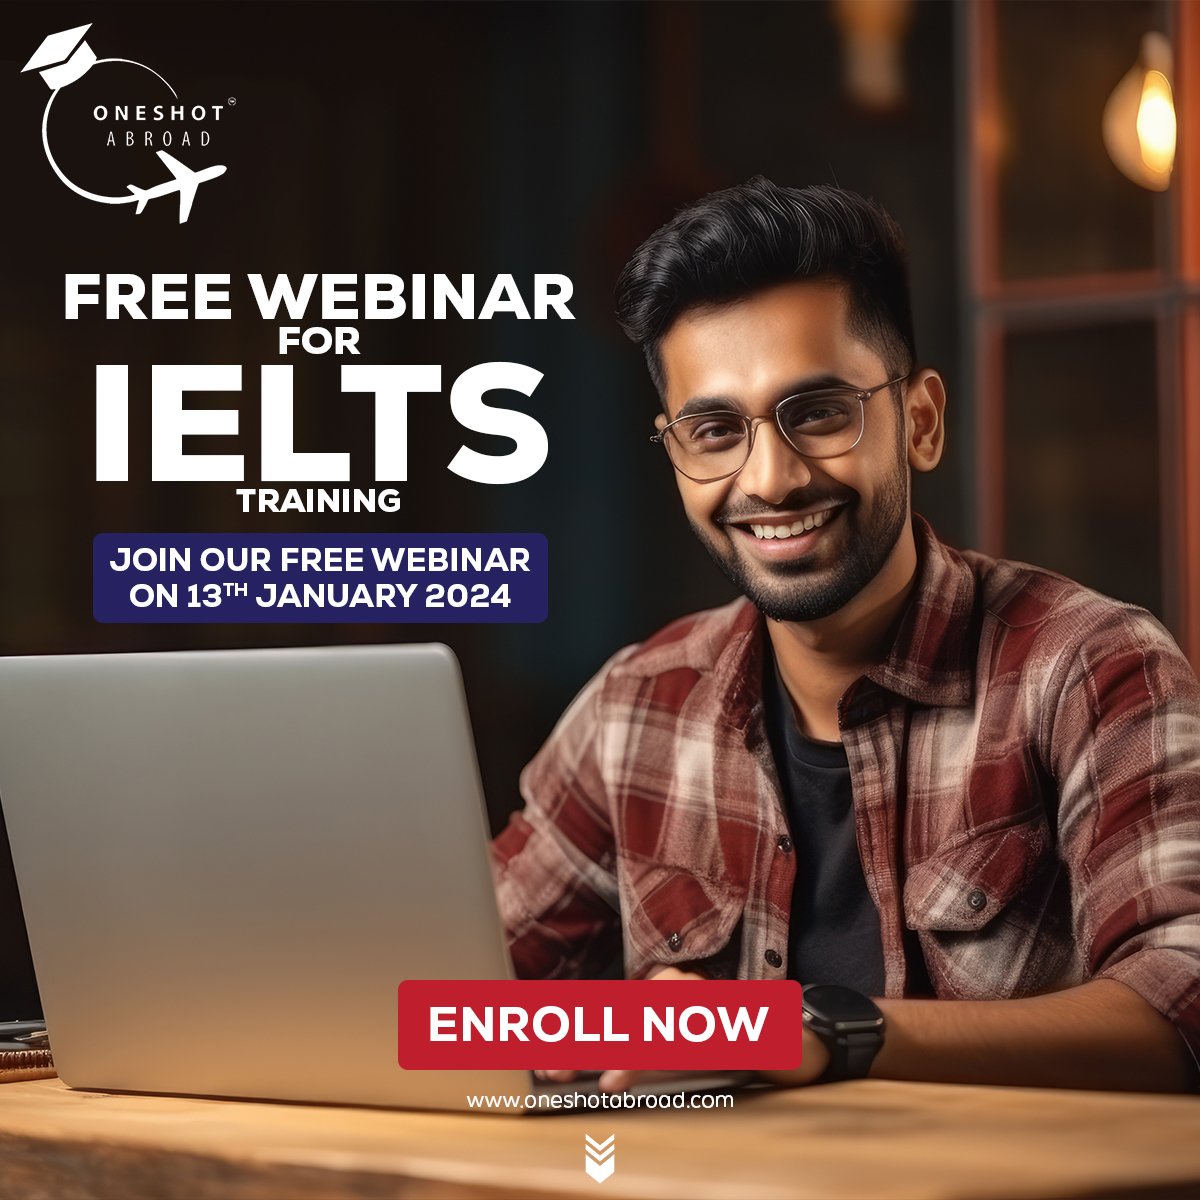 Free! Free! Free!
IELTS Webinar at your Fingertips!
Date: 13th January 2024.
Enroll Now on the link (Link also in bio)
forms.gle/1zvuJM8huAazWK…
#studyielts #studyabroad  #expertcounsellor #ielts #free #freewebinar #freewebinarielts #january #indianstudents #ieltstraining #student